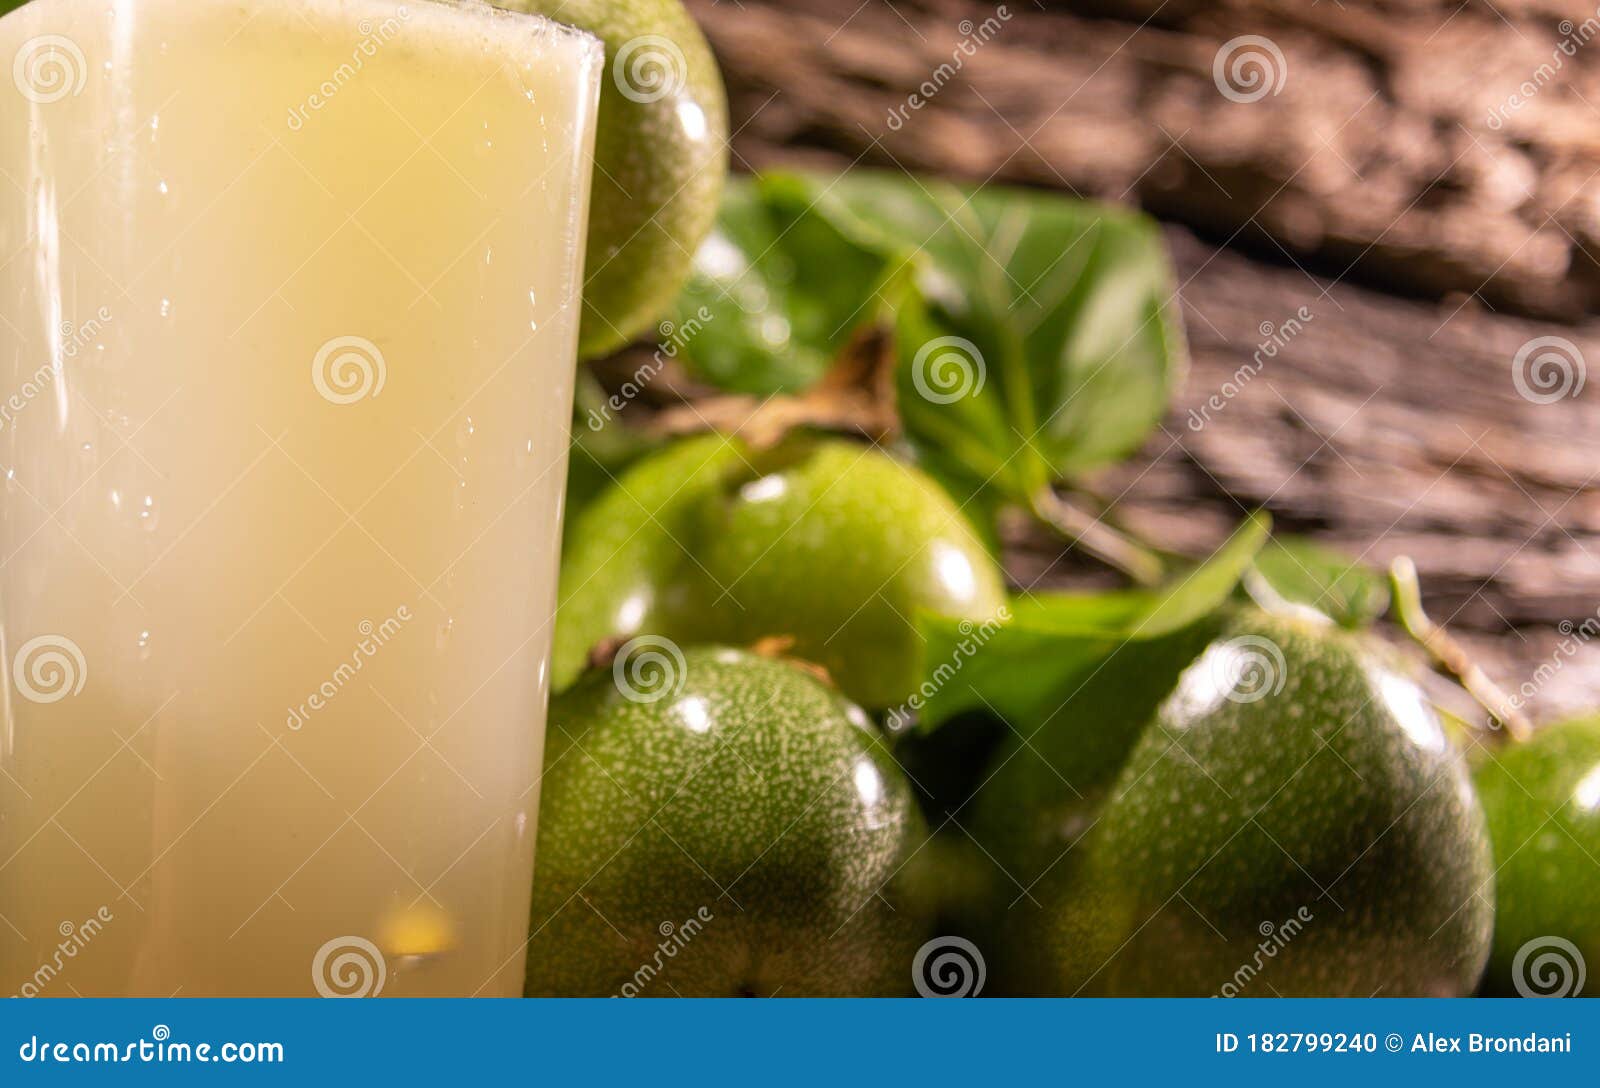 fresh fruits and glass of passion fruit passiflora edulis juice amid green leaves and wooden background